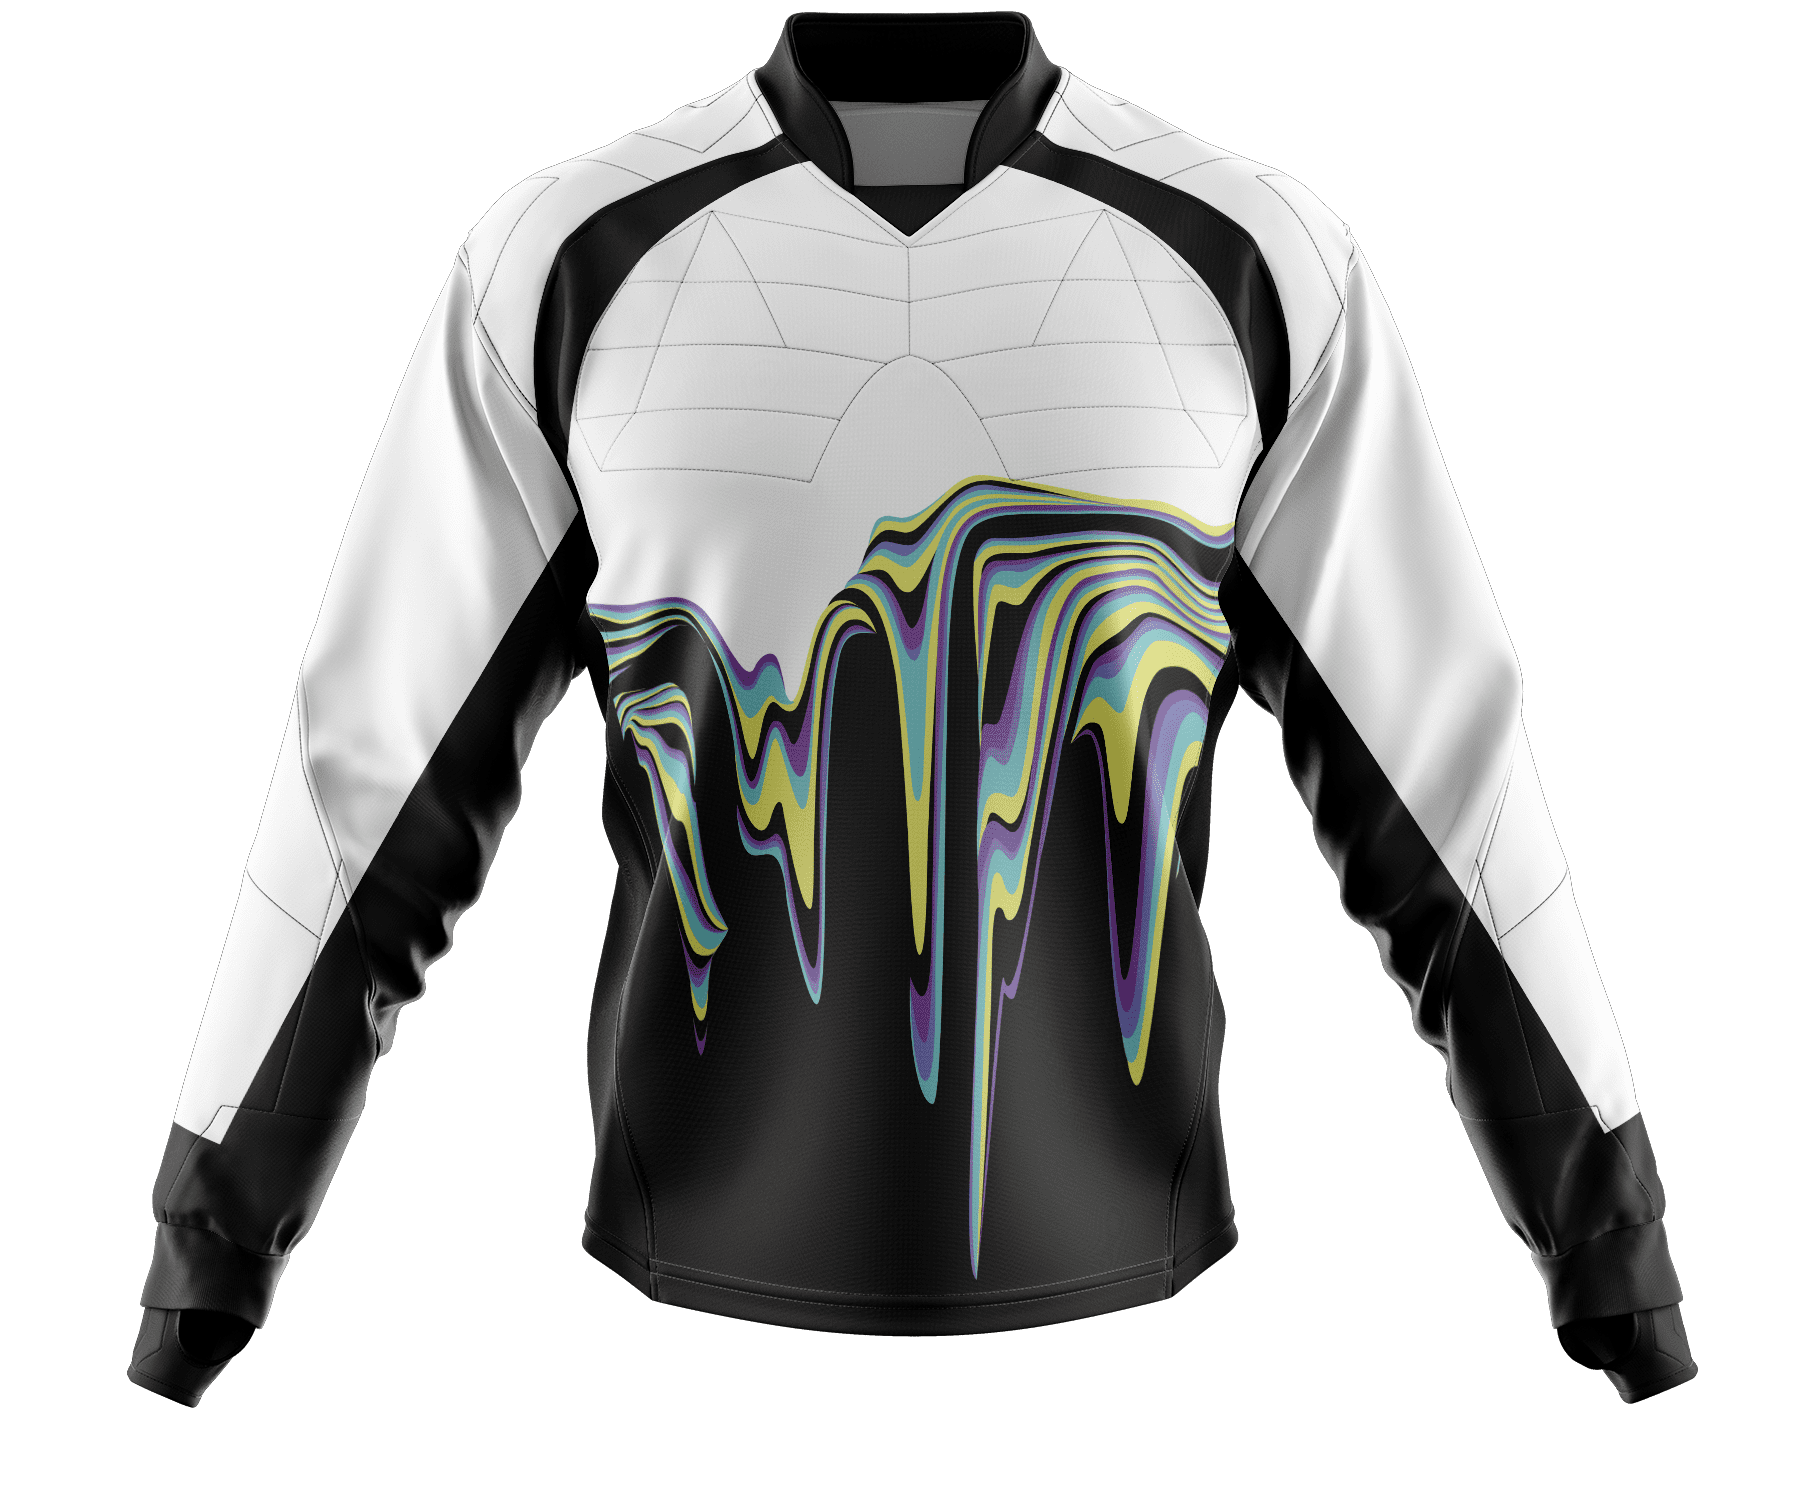 Paintball Jersey Mockup - Free Download Images High Quality PNG, JPG